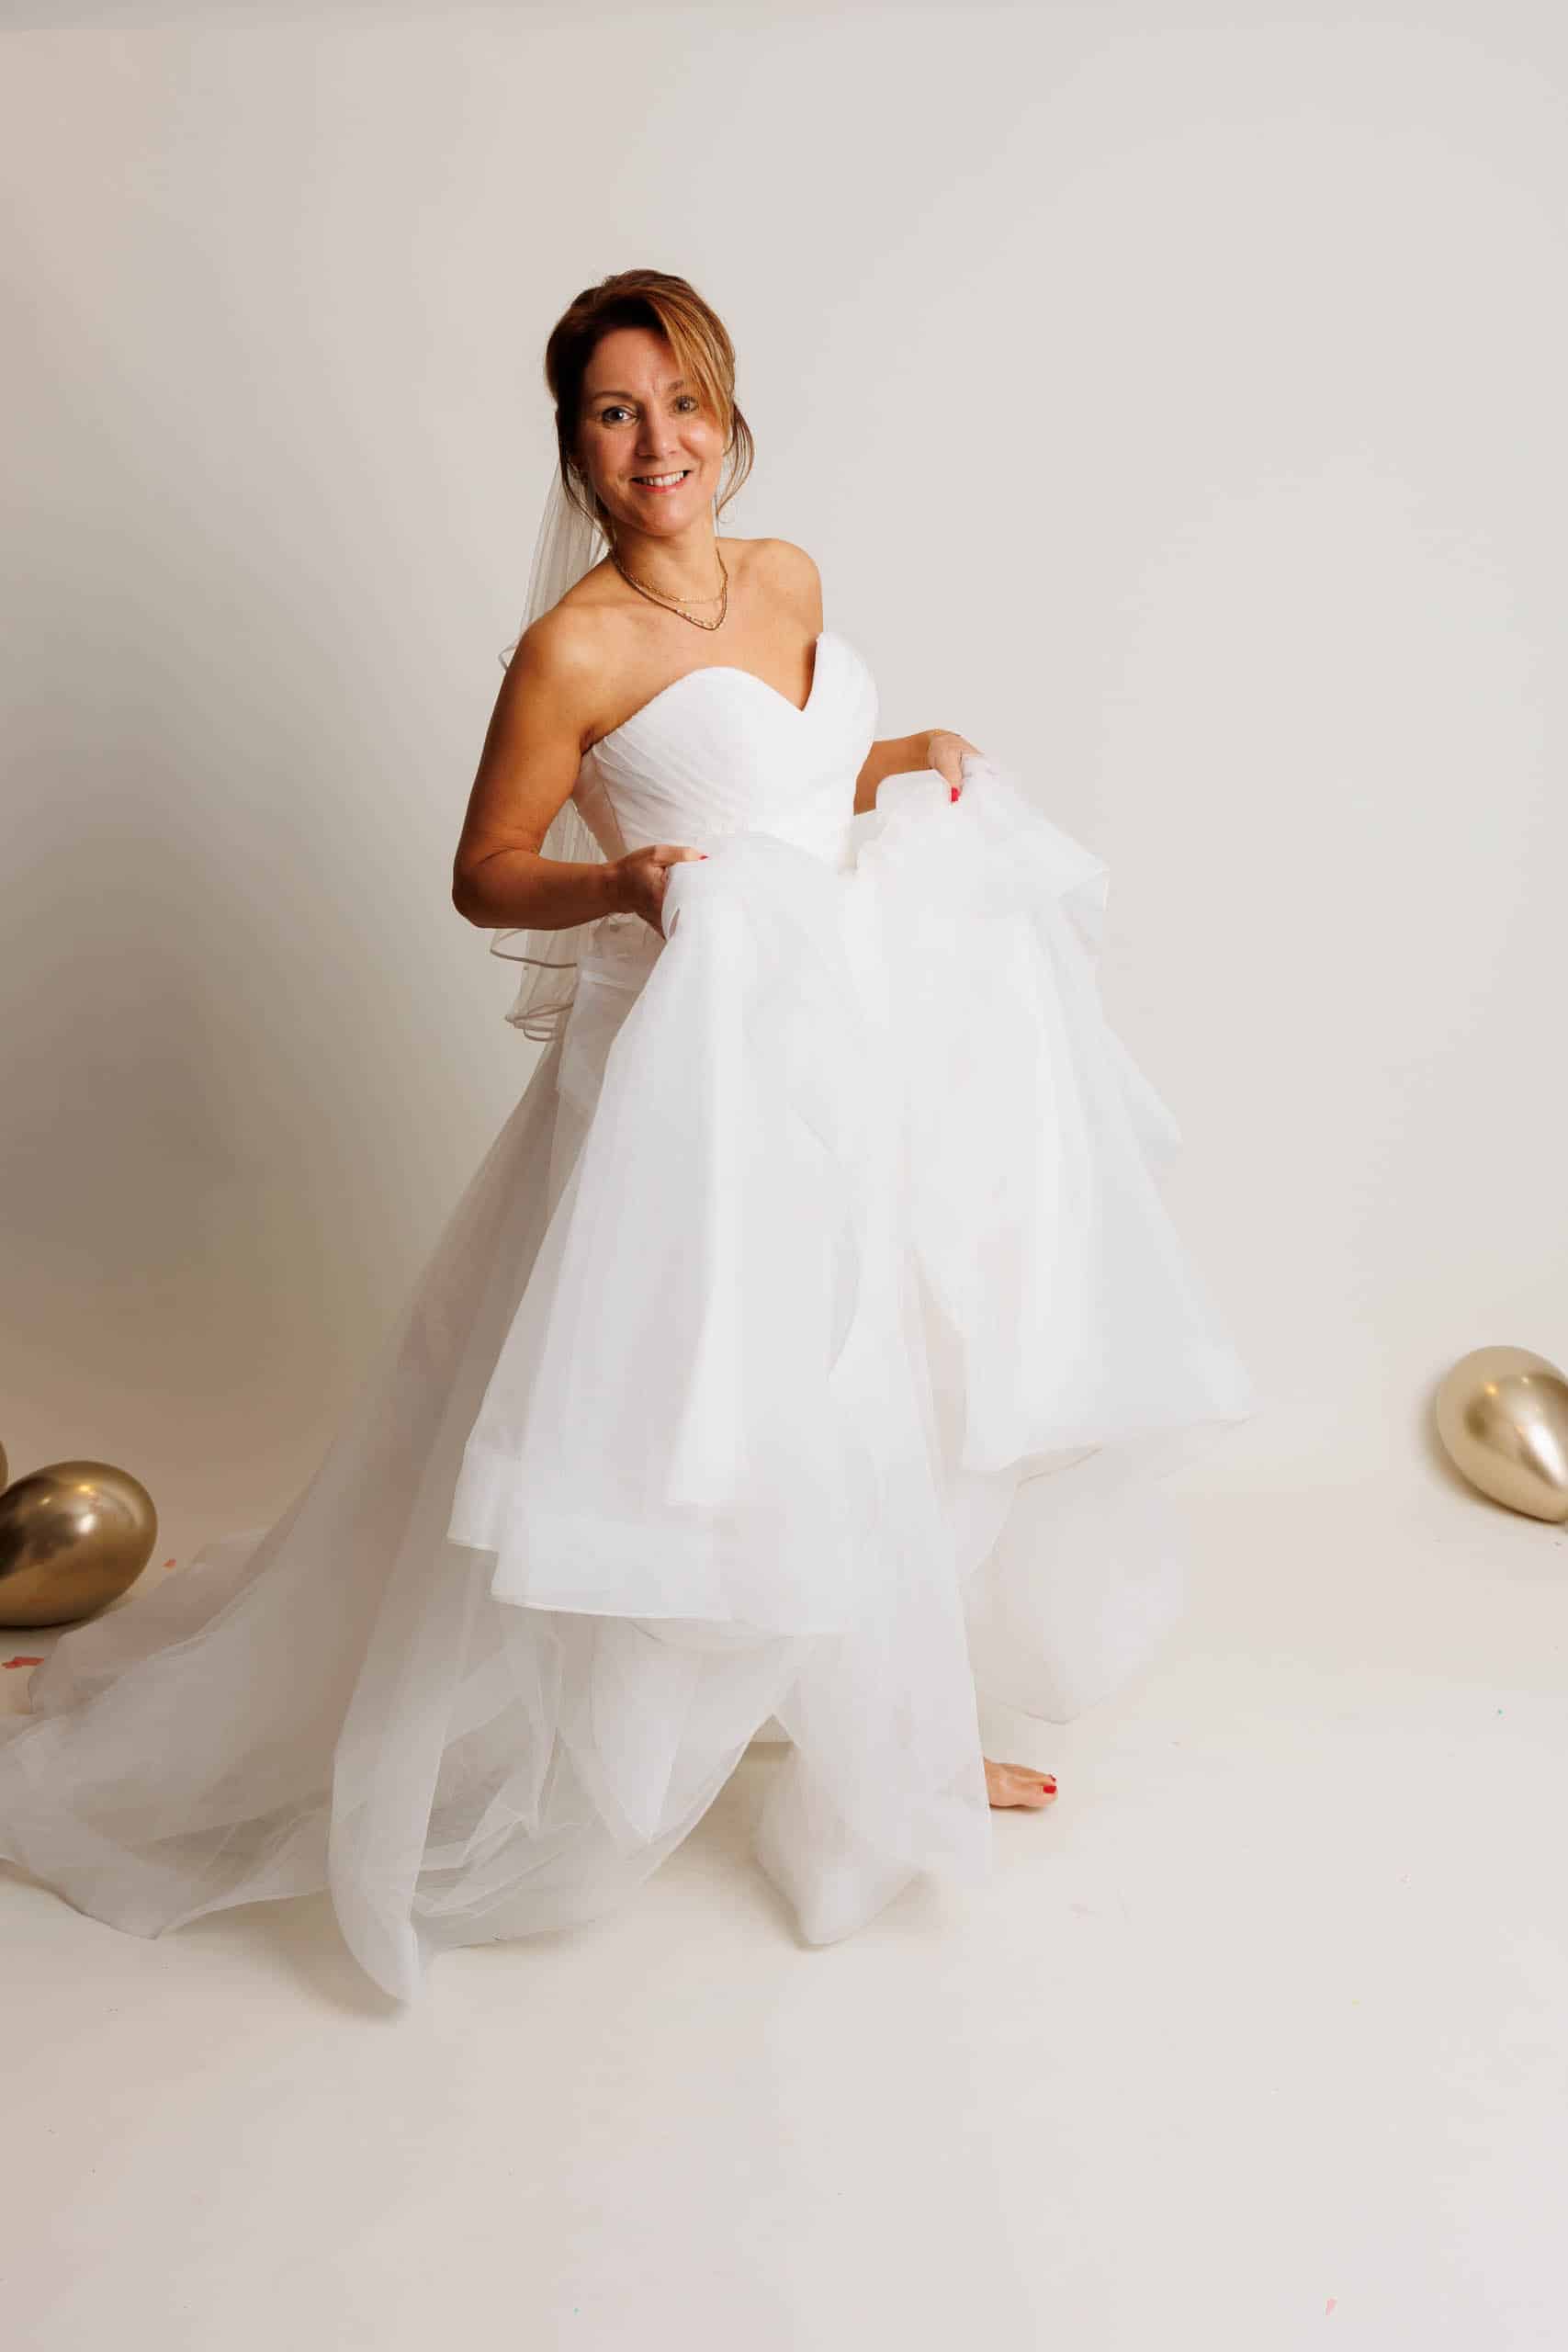 A bride in a wedding dress poses for a photo while trying on wedding dresses for fun.